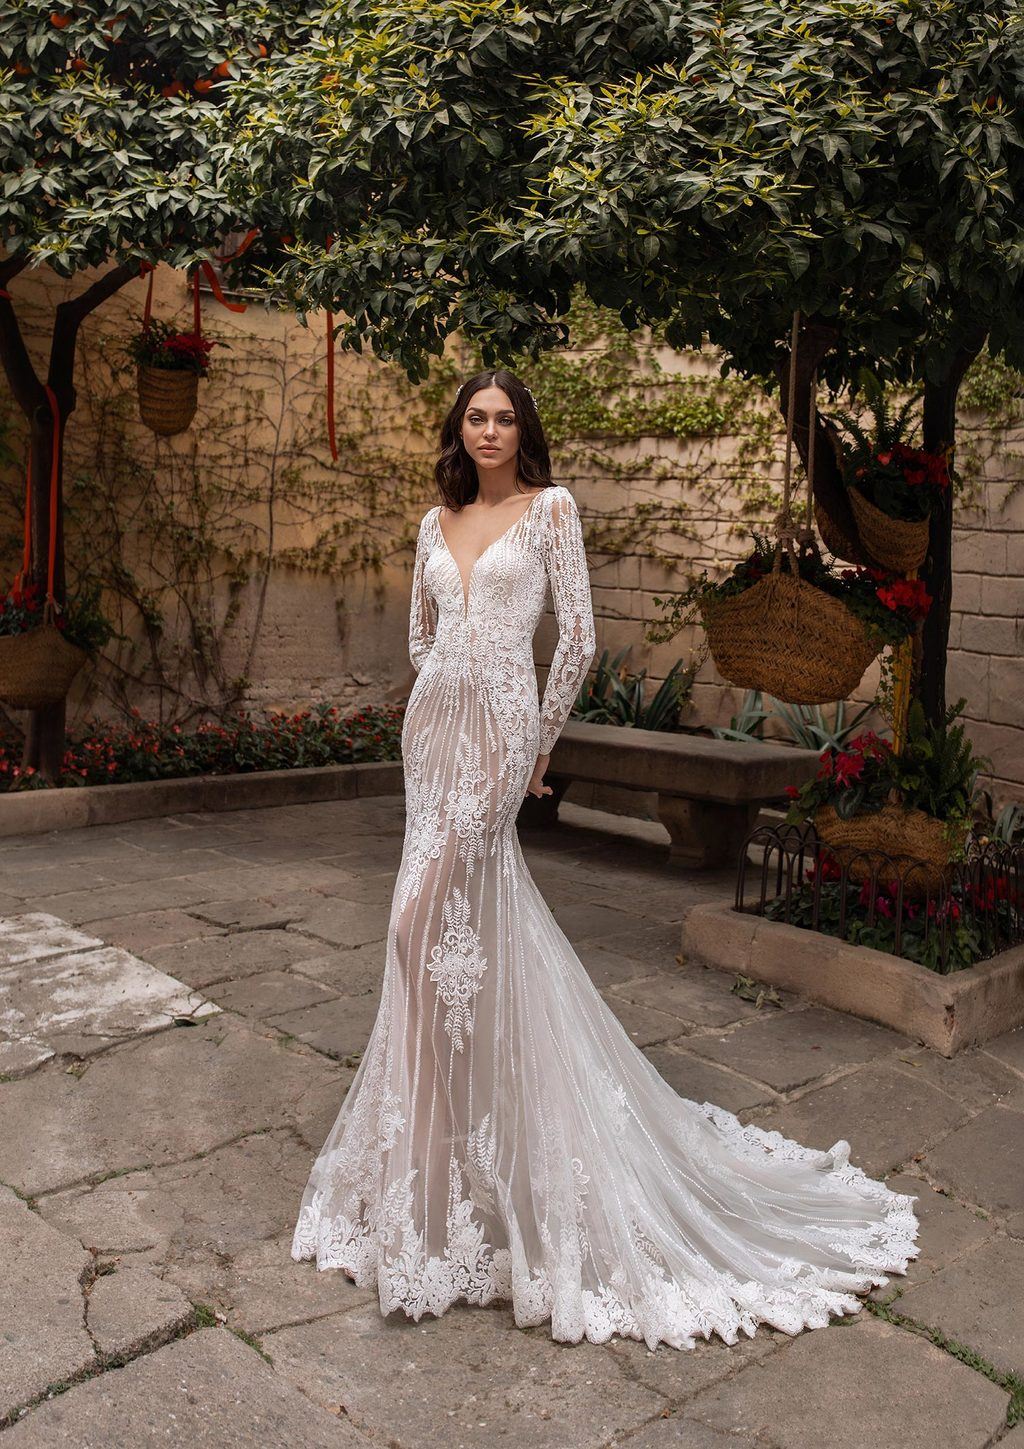 Berta Mermaid Lace Appliqued Gal Gadot Wedding Dress With Sweetheart  Neckline And Backless Design 2019 Collection From Manweisi, $147.63 |  DHgate.Com